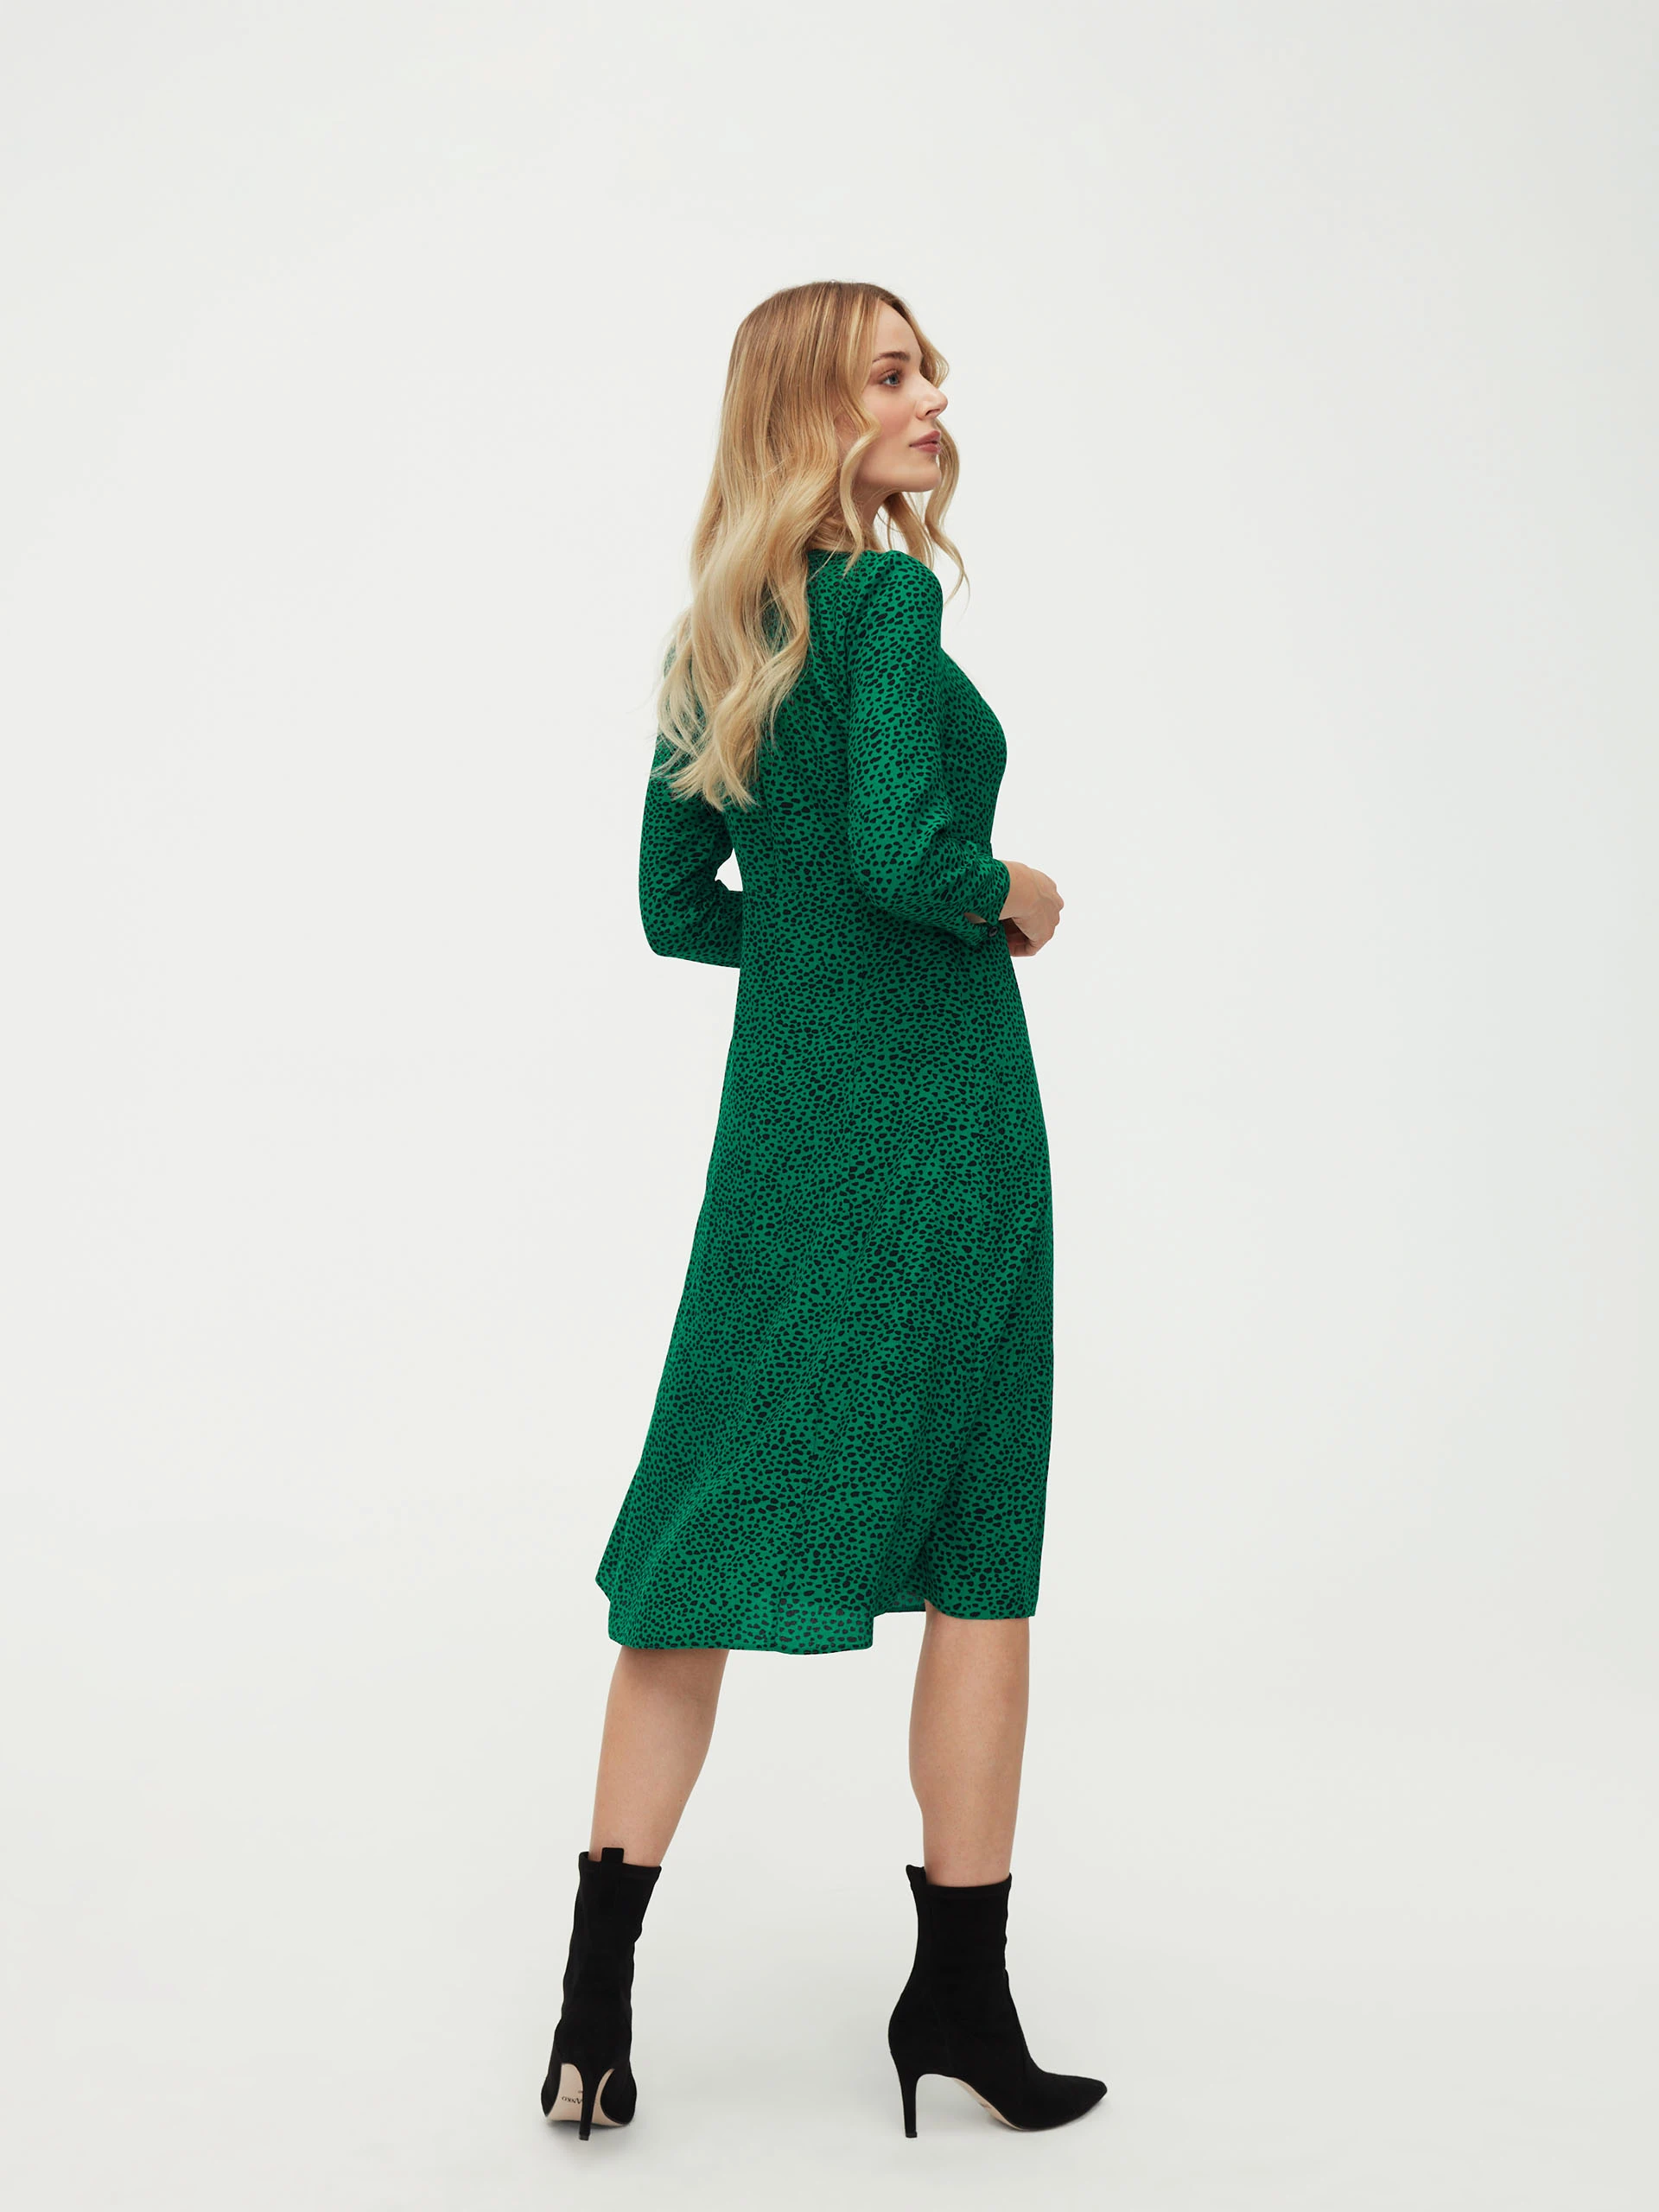 Green dress with delicate pattern